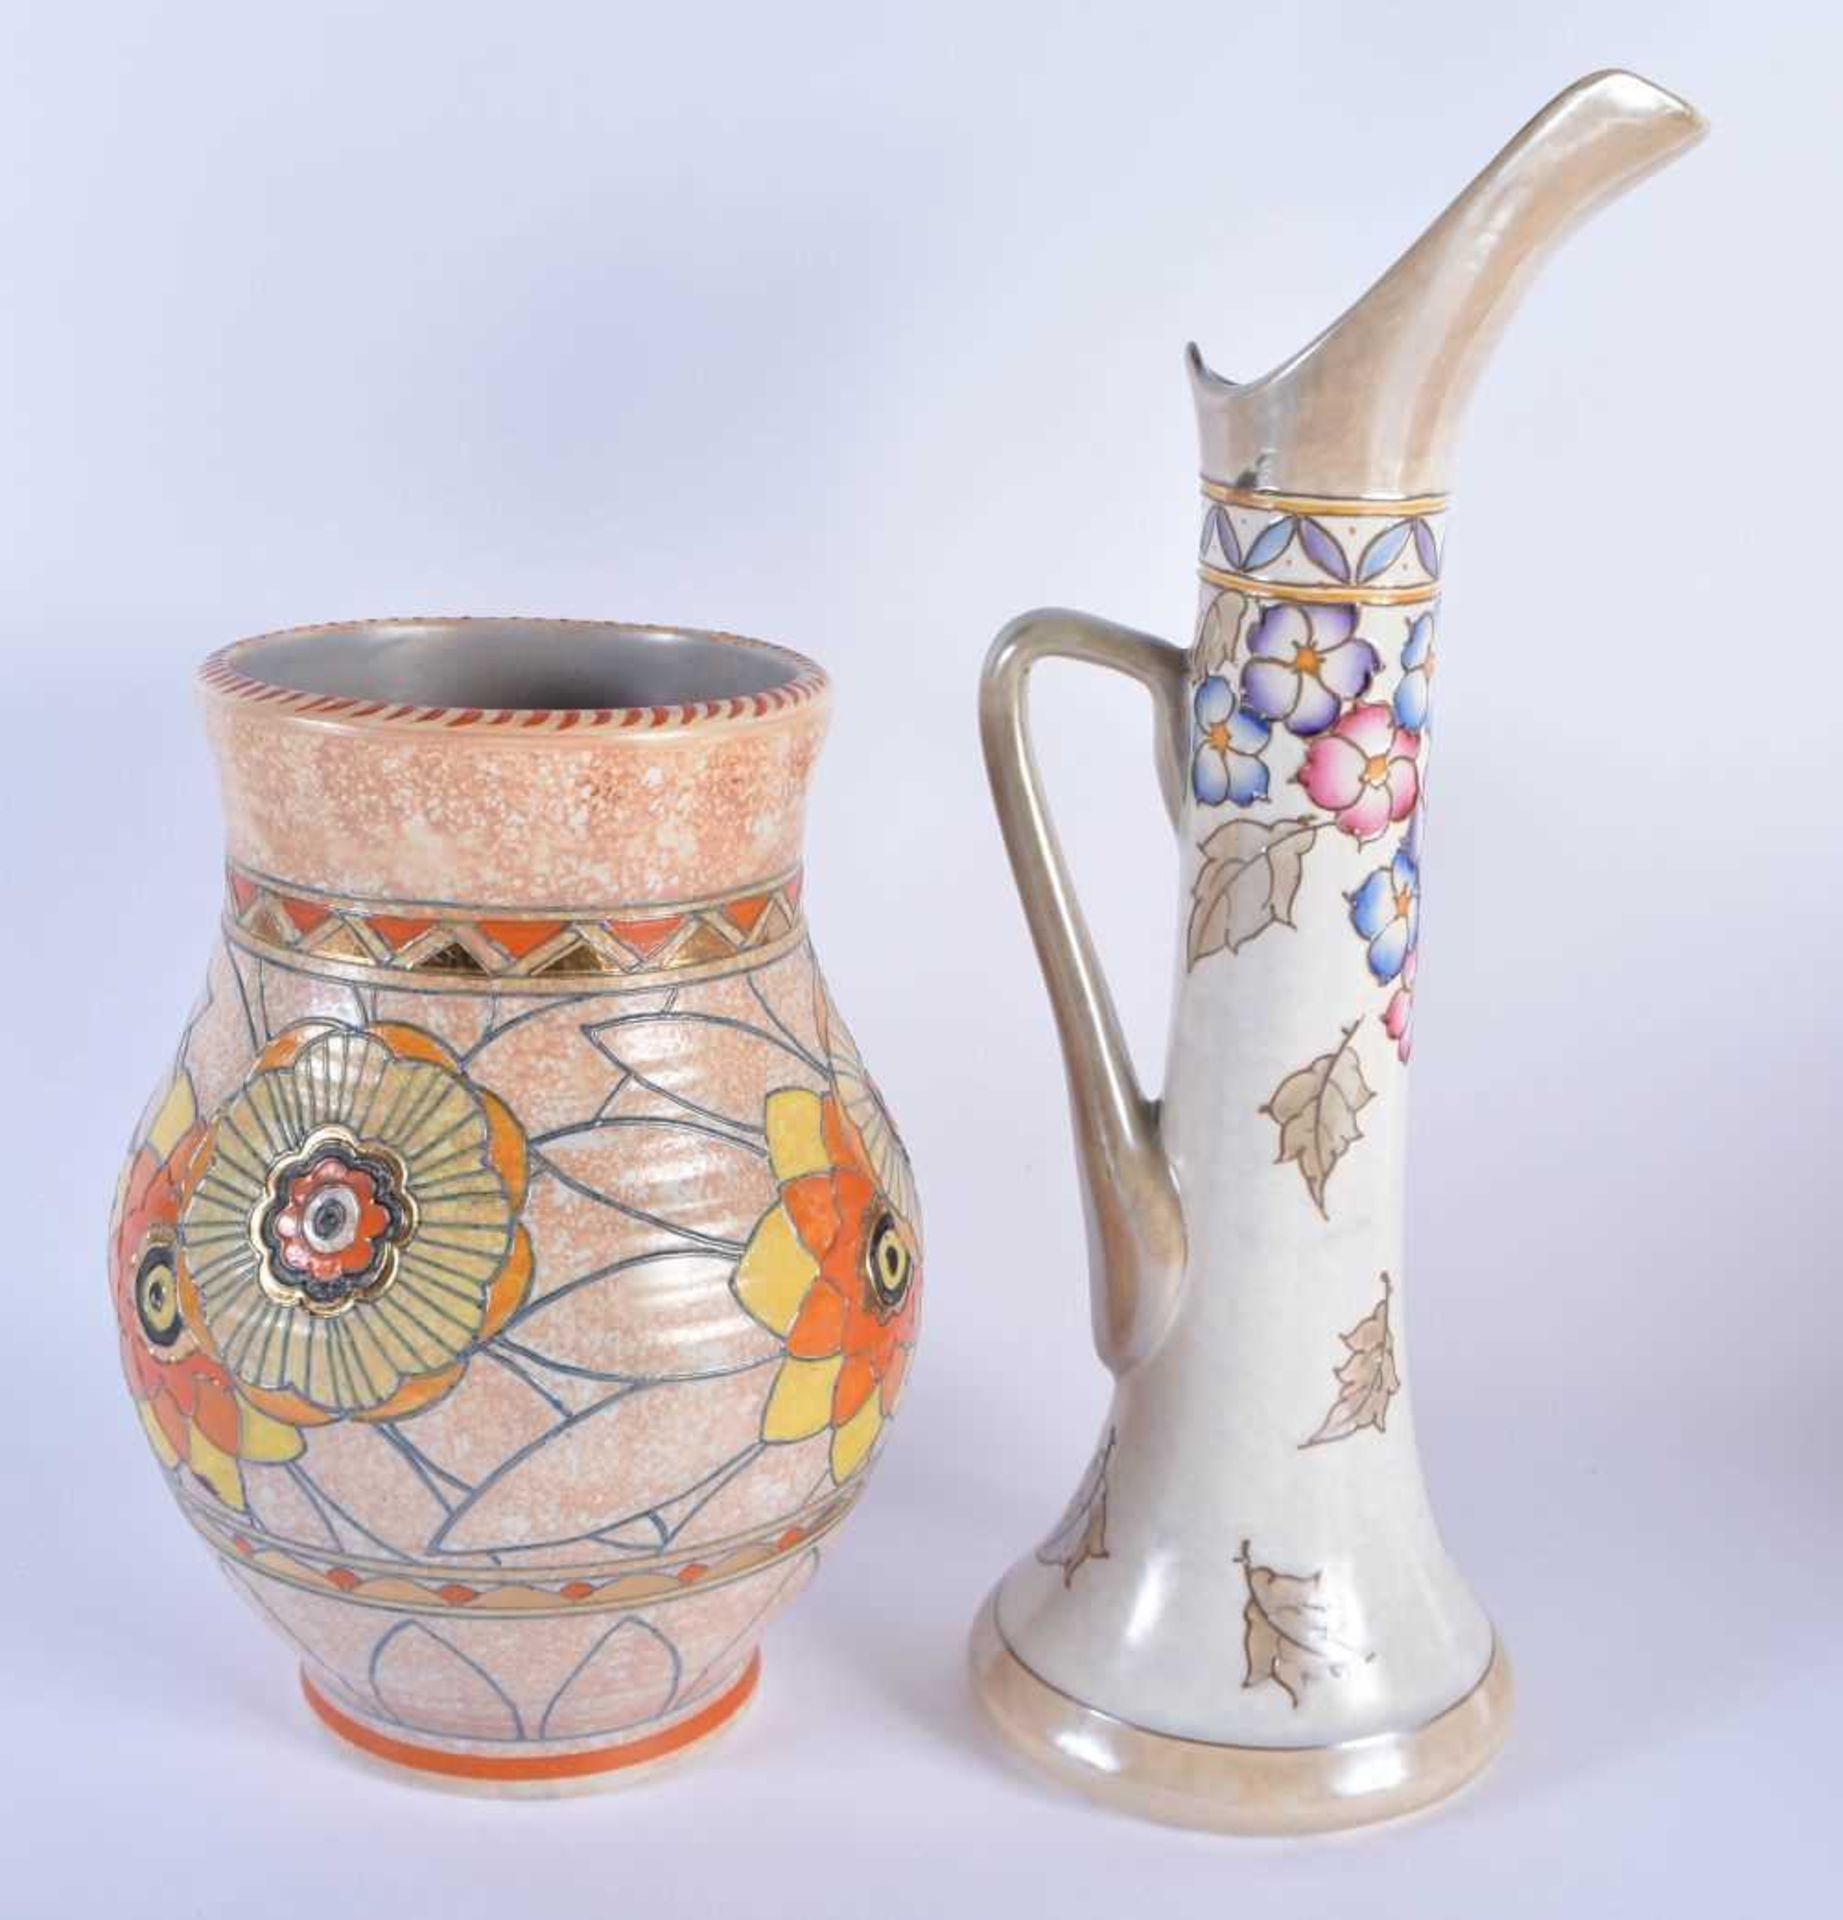 THREE LARGE ART DECO ENGLISH POTTERY VASES together with a ewer, bursley ware etc. Largest 38.5 cm - Image 6 of 8